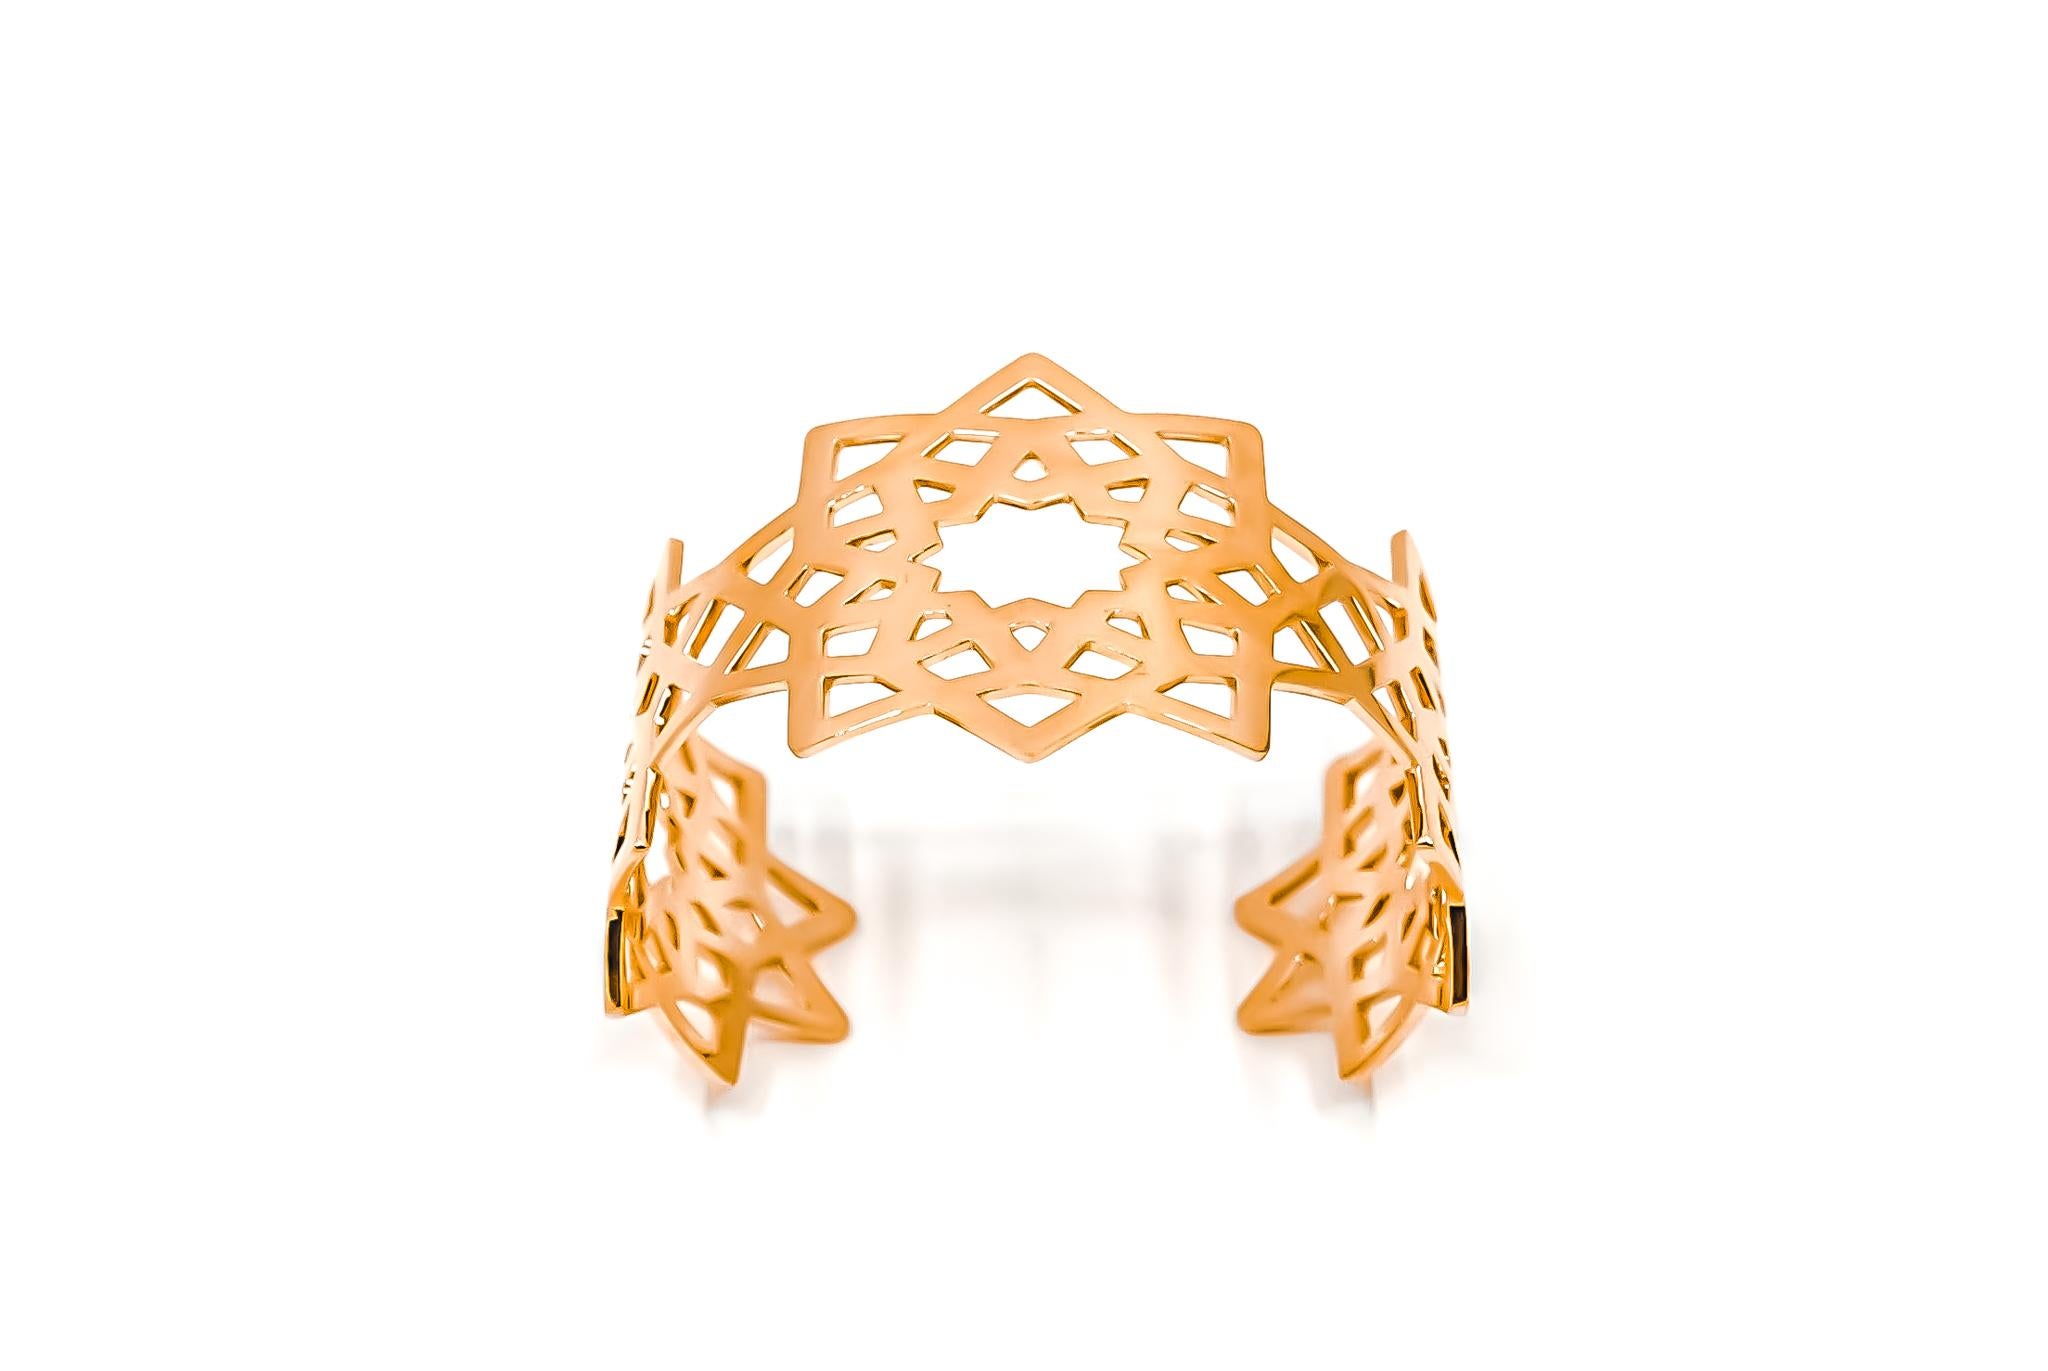 18kt solid rose gold cuff bracelet by Mohamad Kamra from the Arabesque Deco Collection.

The design of the cuff bracelet is inspired by the Andalusian Style and Motifs found in Al Hambra Palace in Granada in Spain

Available in 18kt solid yellow,